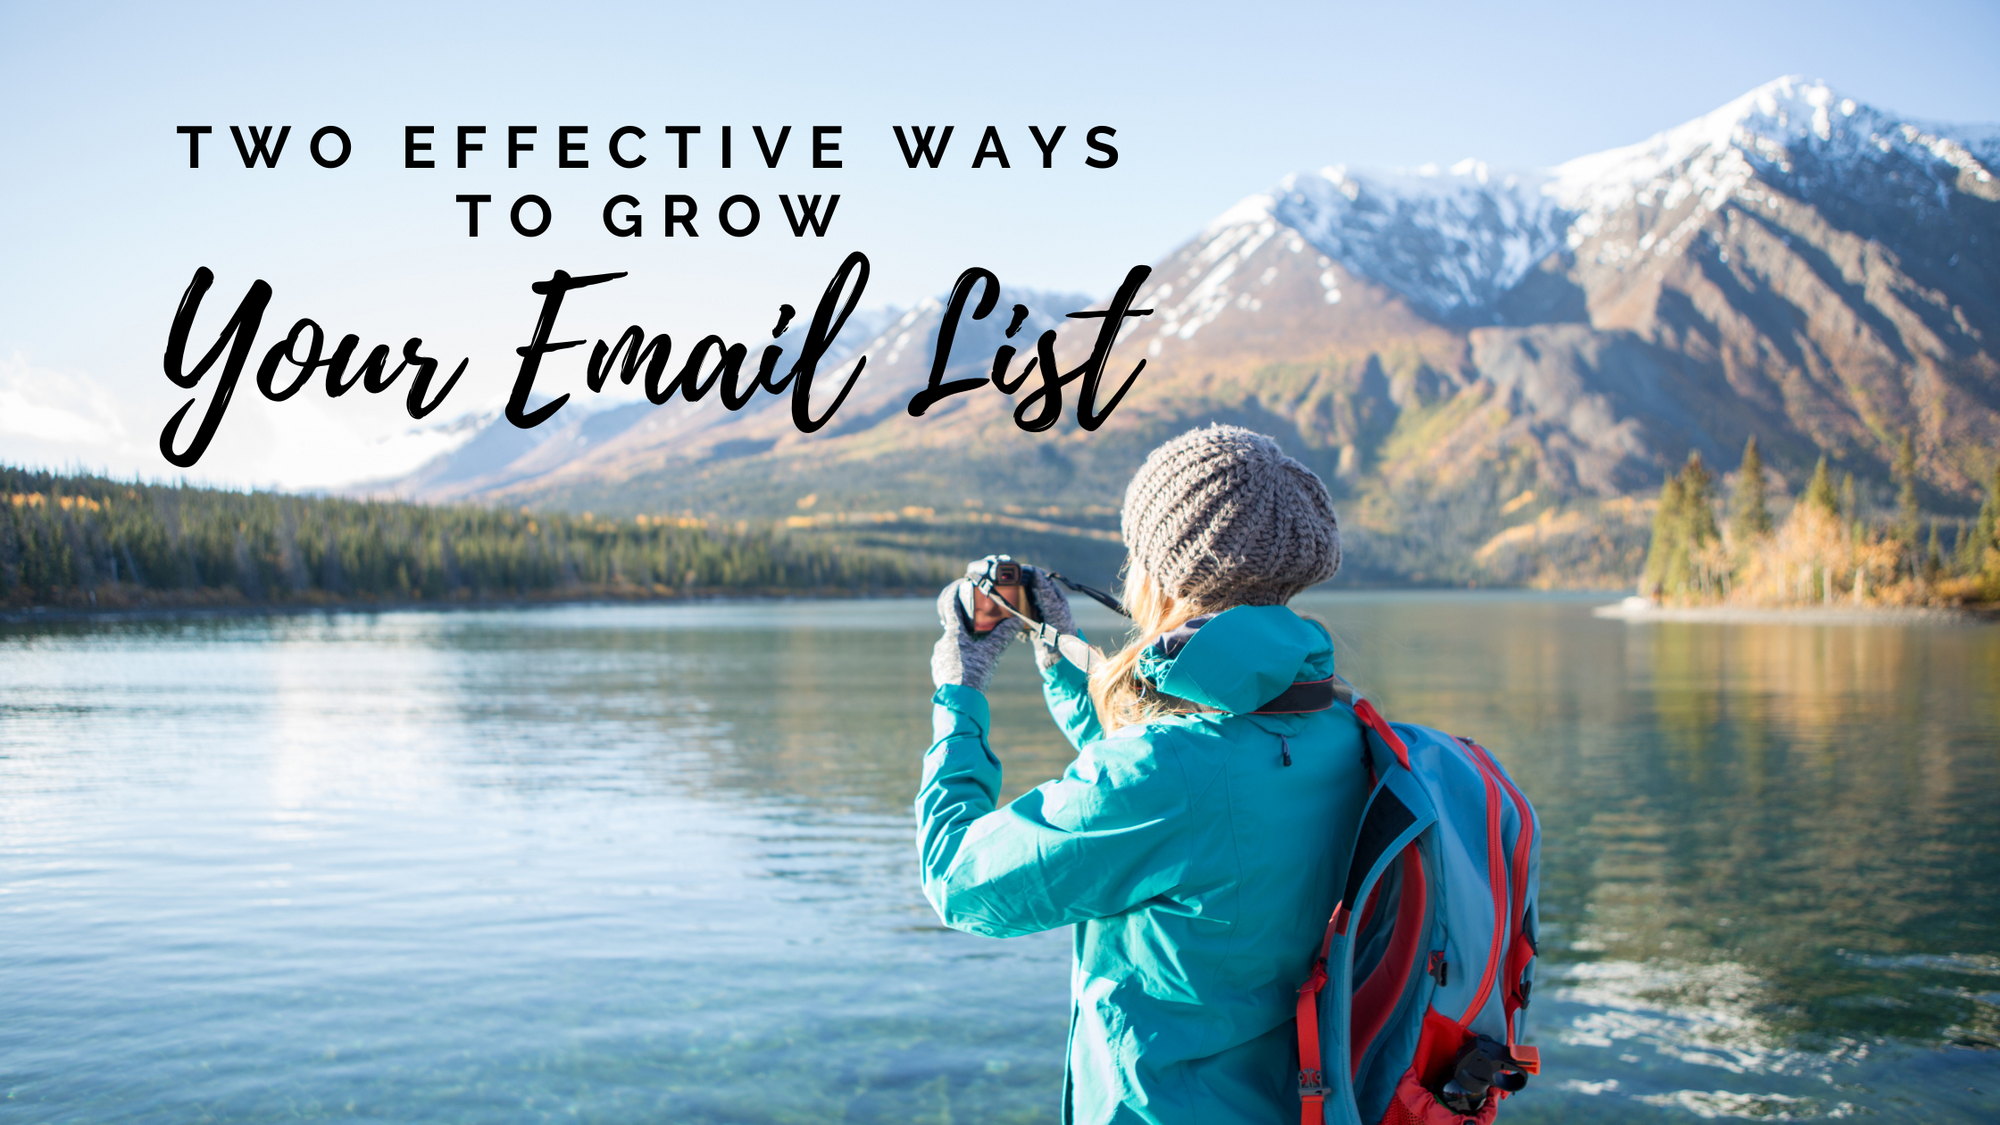 A Guide for Landscape Photographers: Two Effective Ways to Grow Your Email List